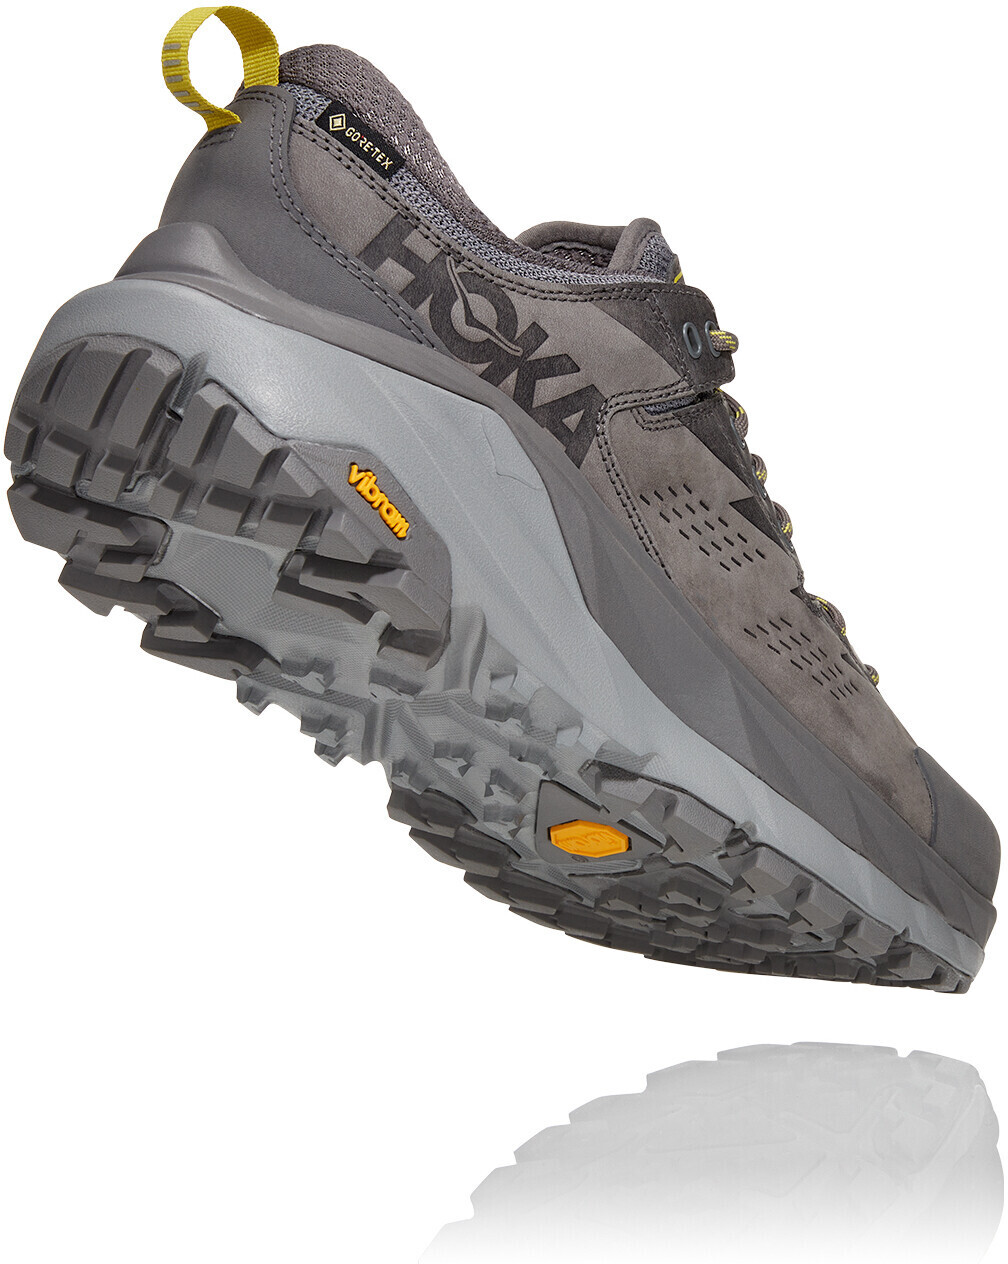 Buy Hoka One One Kaha Low grey from £130.00 (Today) – Best Deals on ...